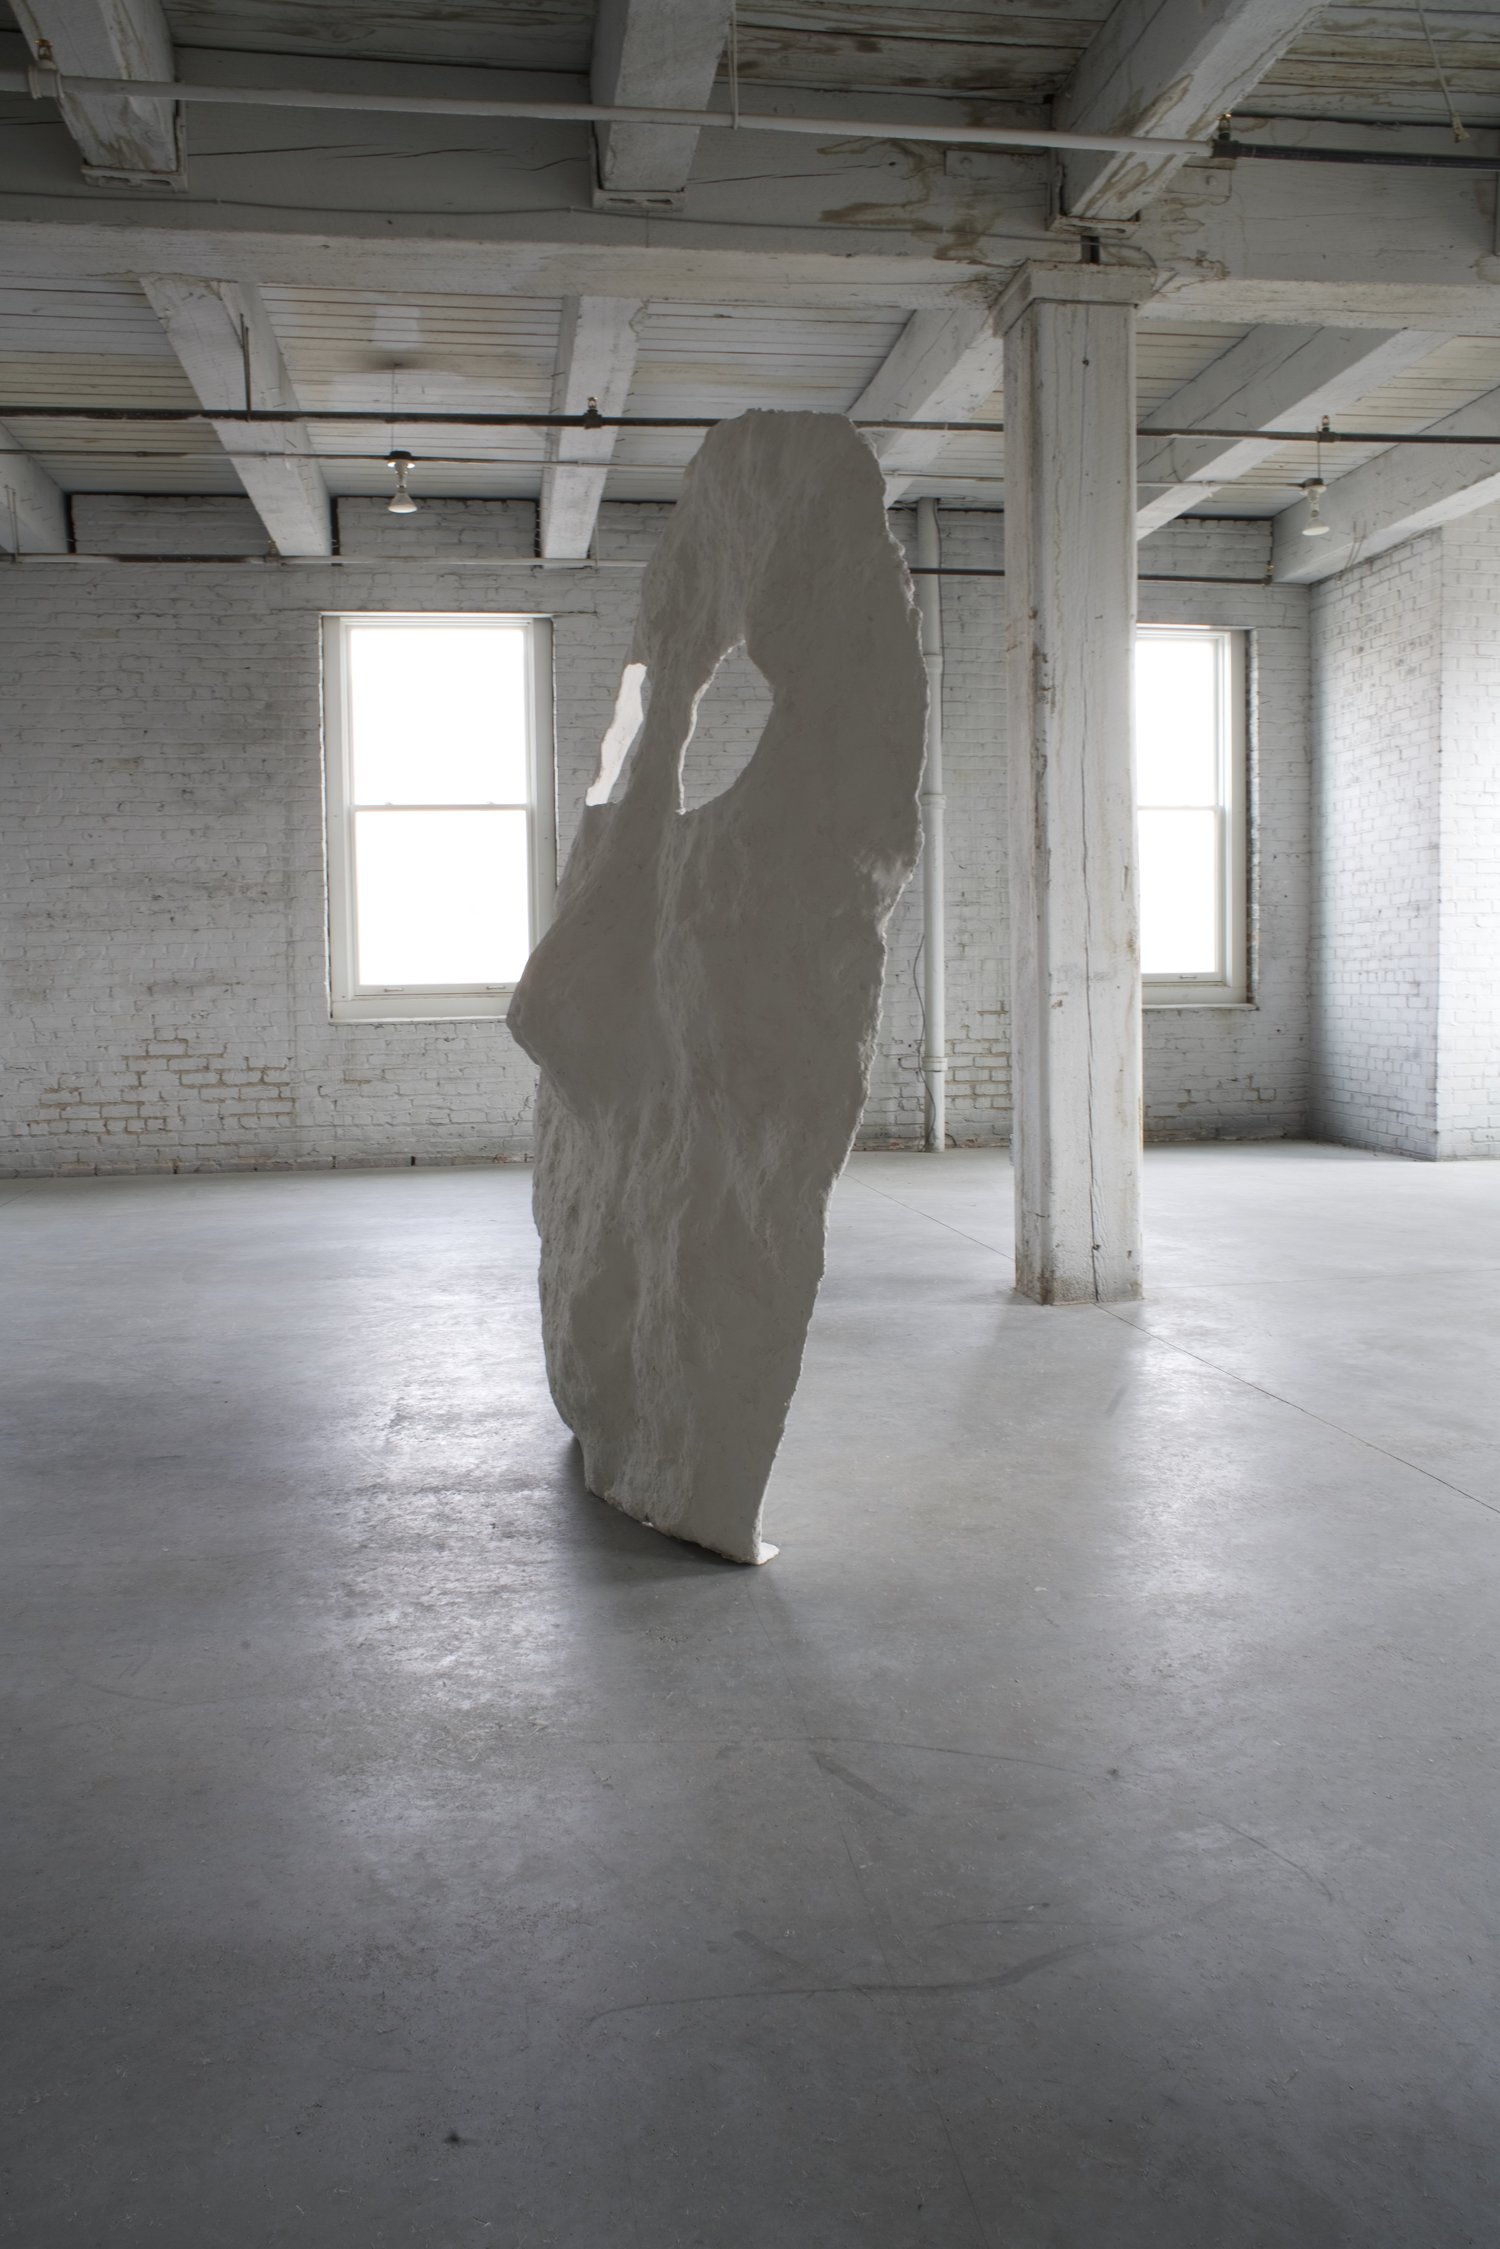 Photograph of large white sculpture reminiscent of face in a warehouse